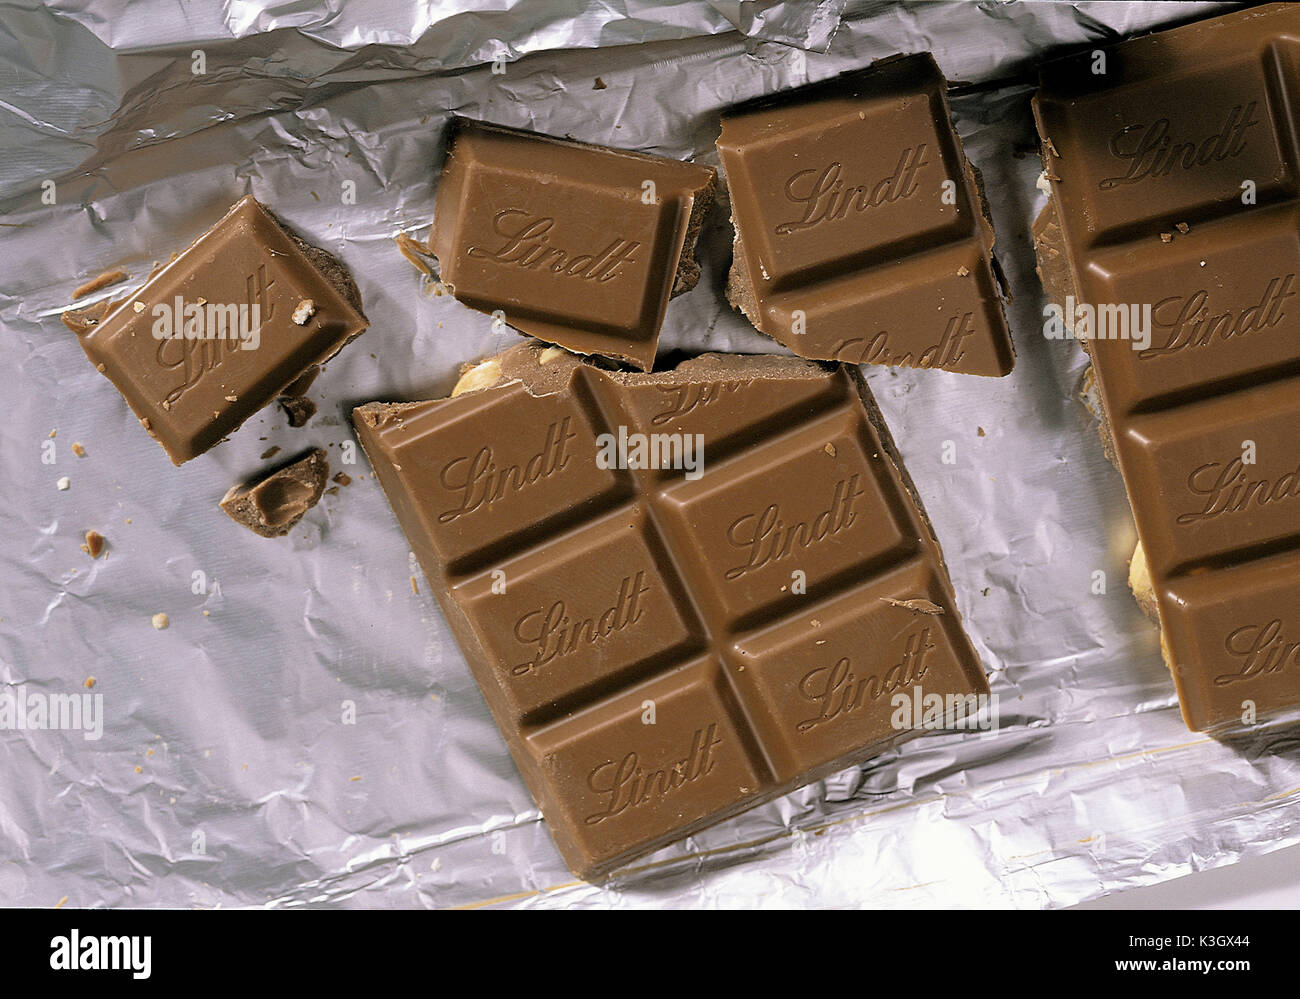 Chocolate in pieces Stock Photo